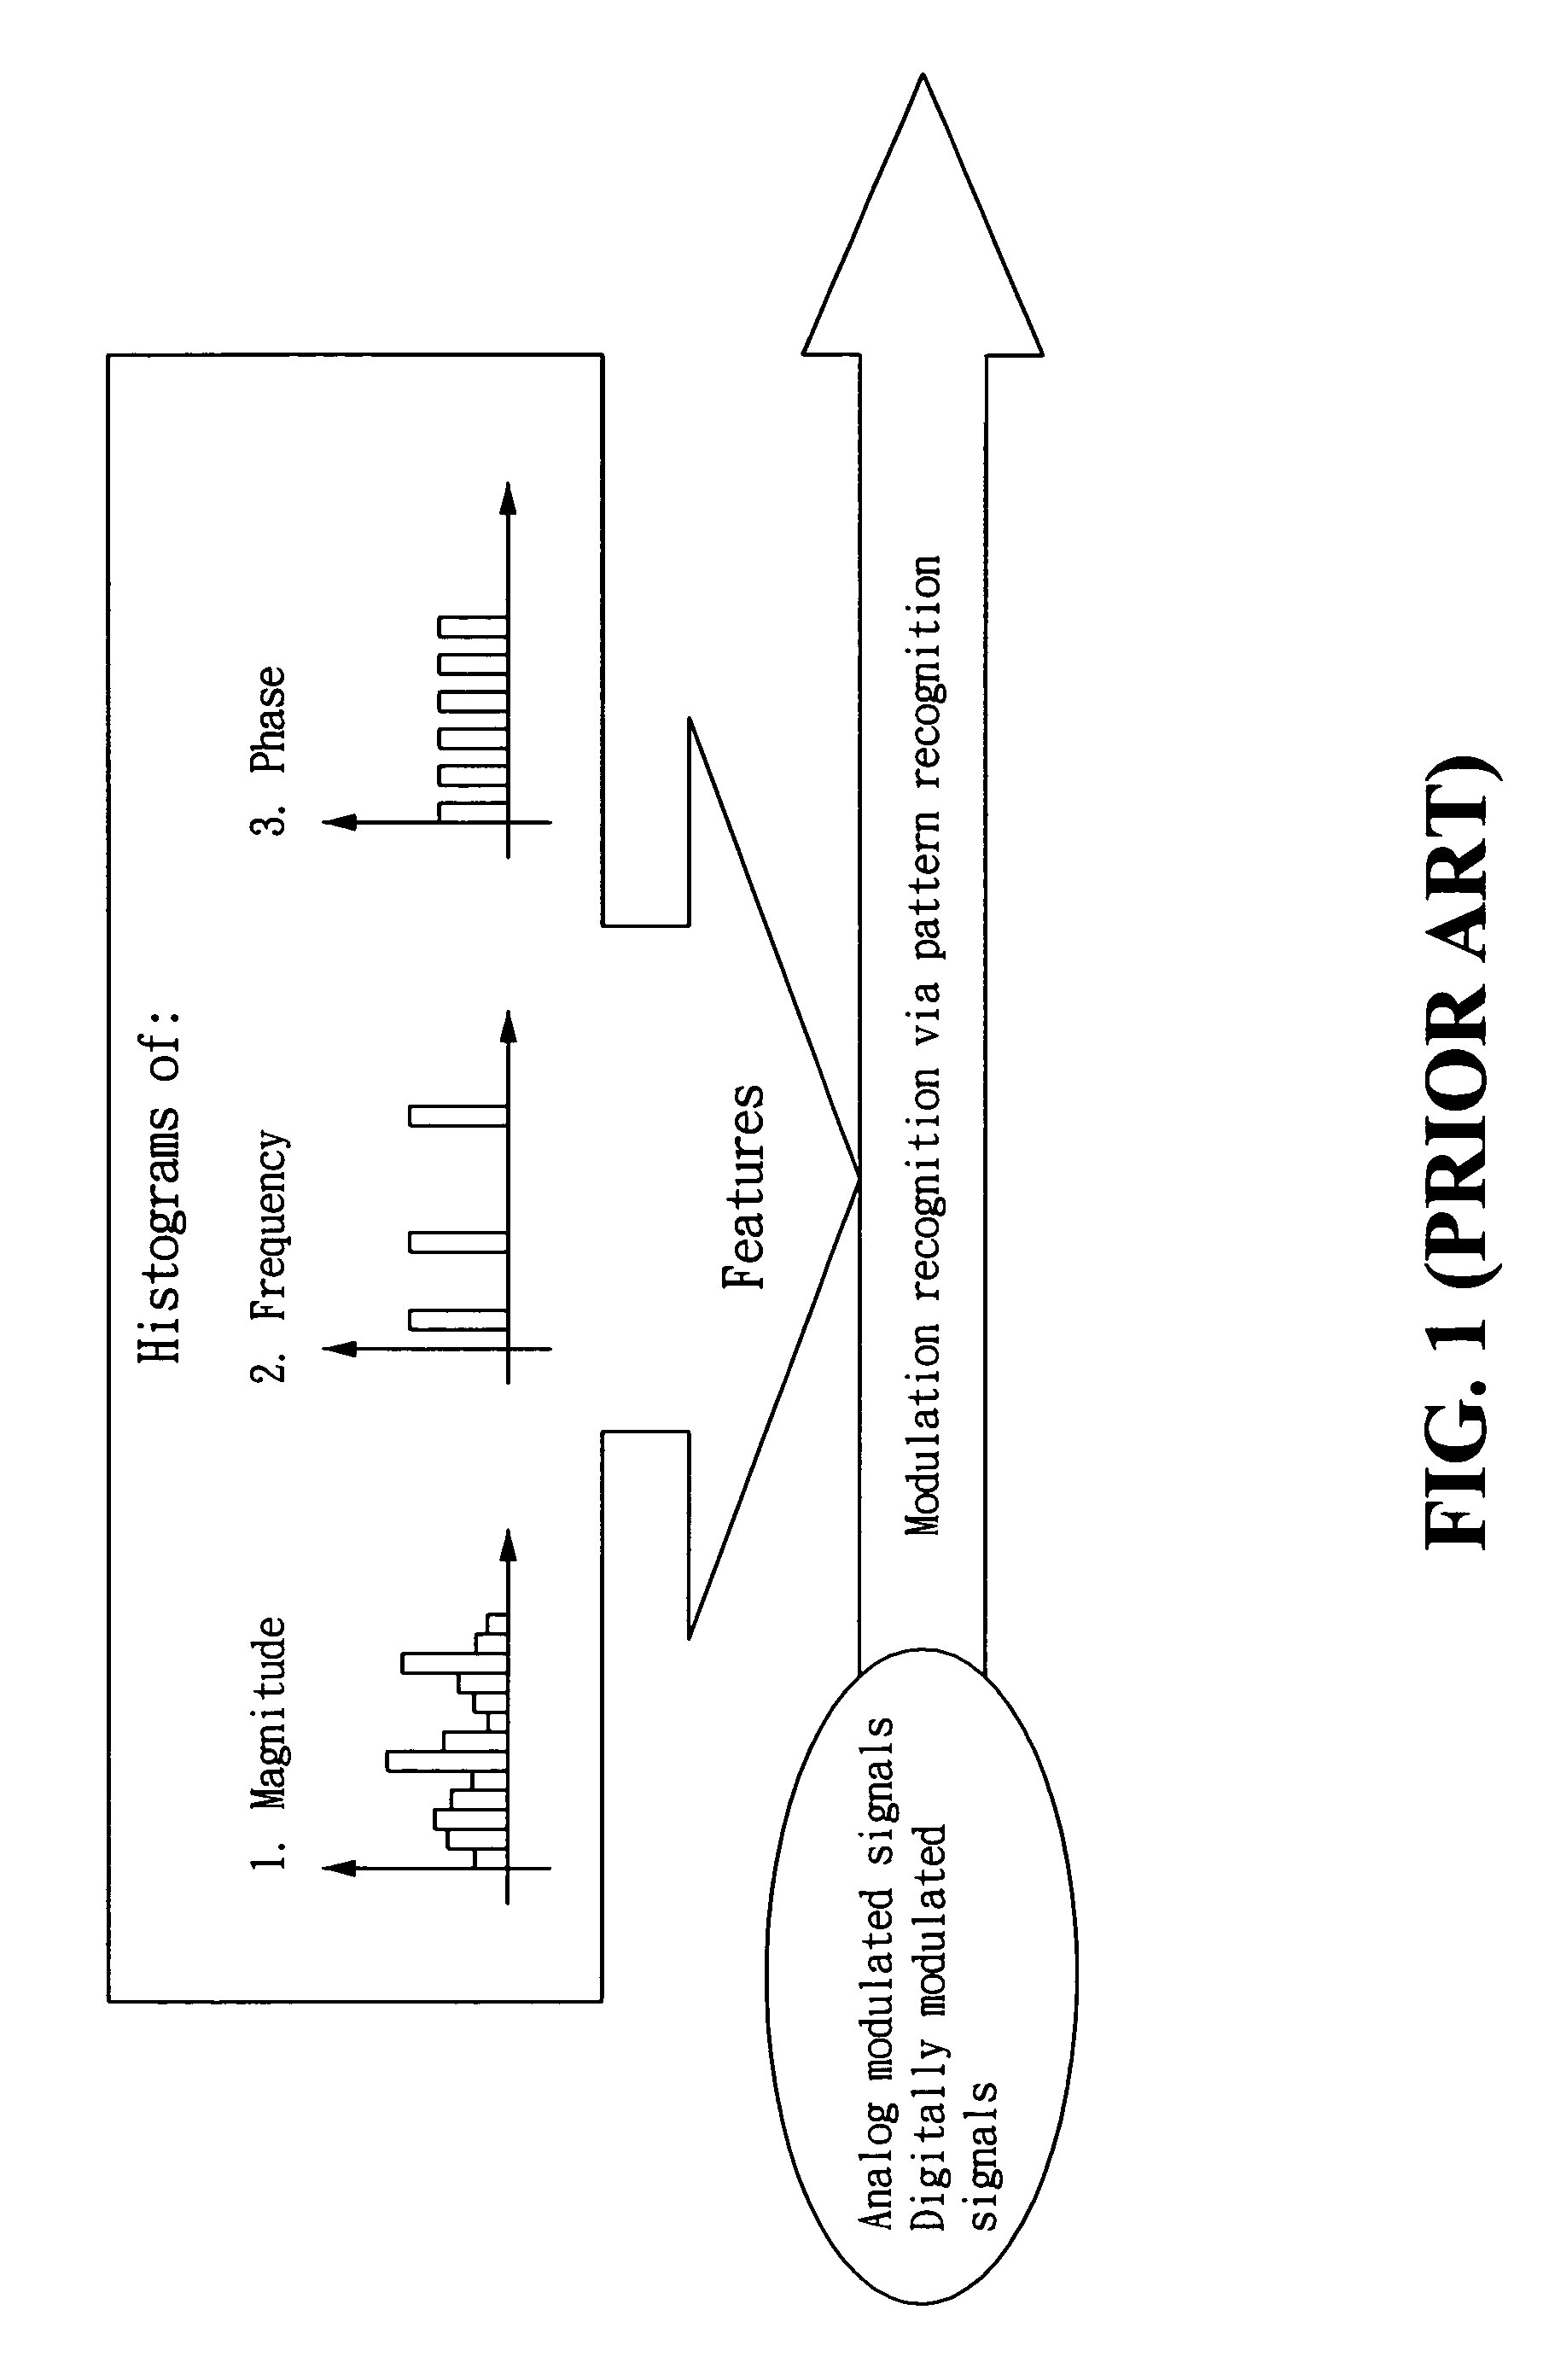 Method and device for modulation recognition of digitally modulated signals with multi-level magnitudes